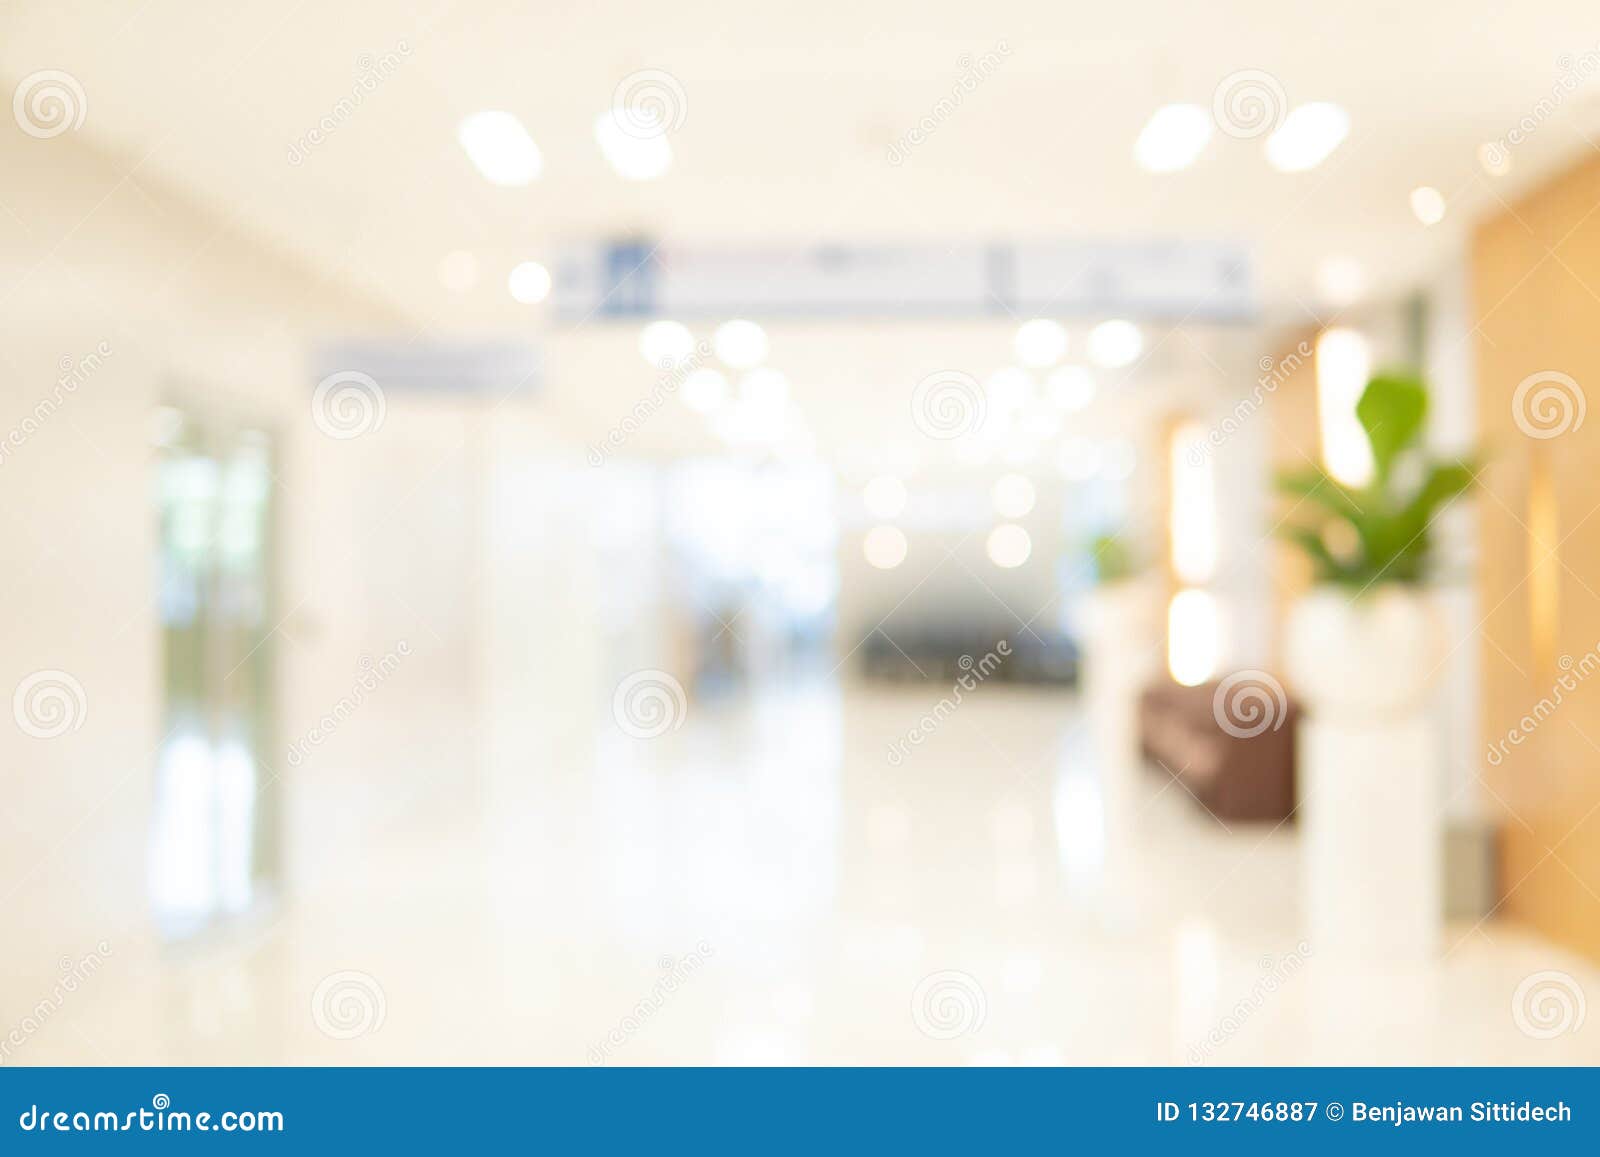 404,686 Clinic Background Stock Photos - Free & Royalty-Free Stock Photos  from Dreamstime